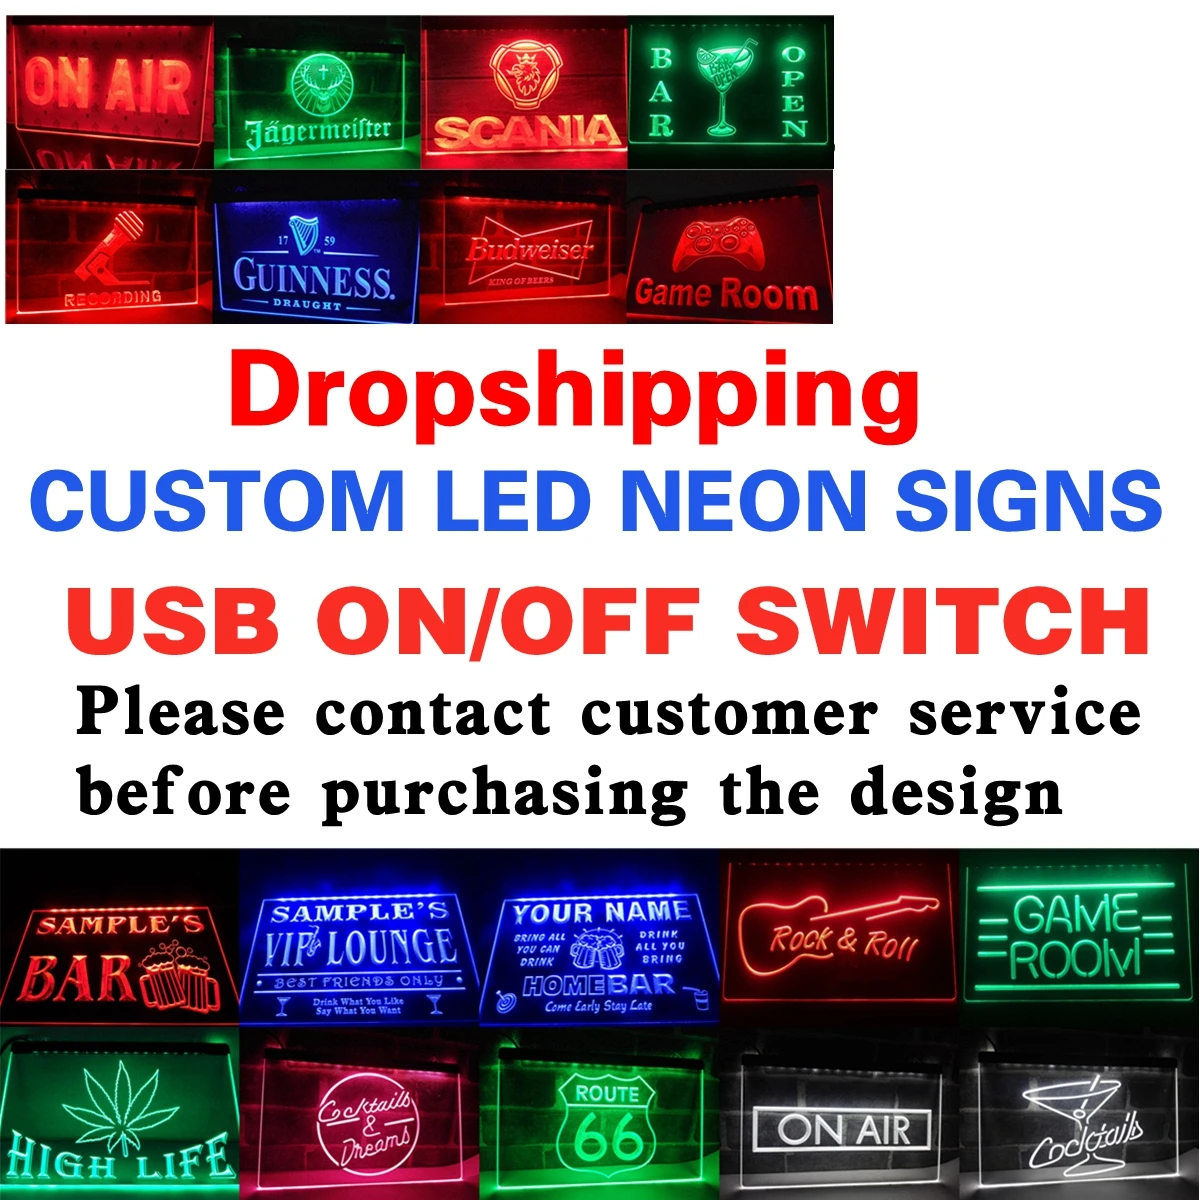 Custom Led Neon Light Signs With On/Off Switch Choose Plaque Lighted Advertisement Board Night Lamp